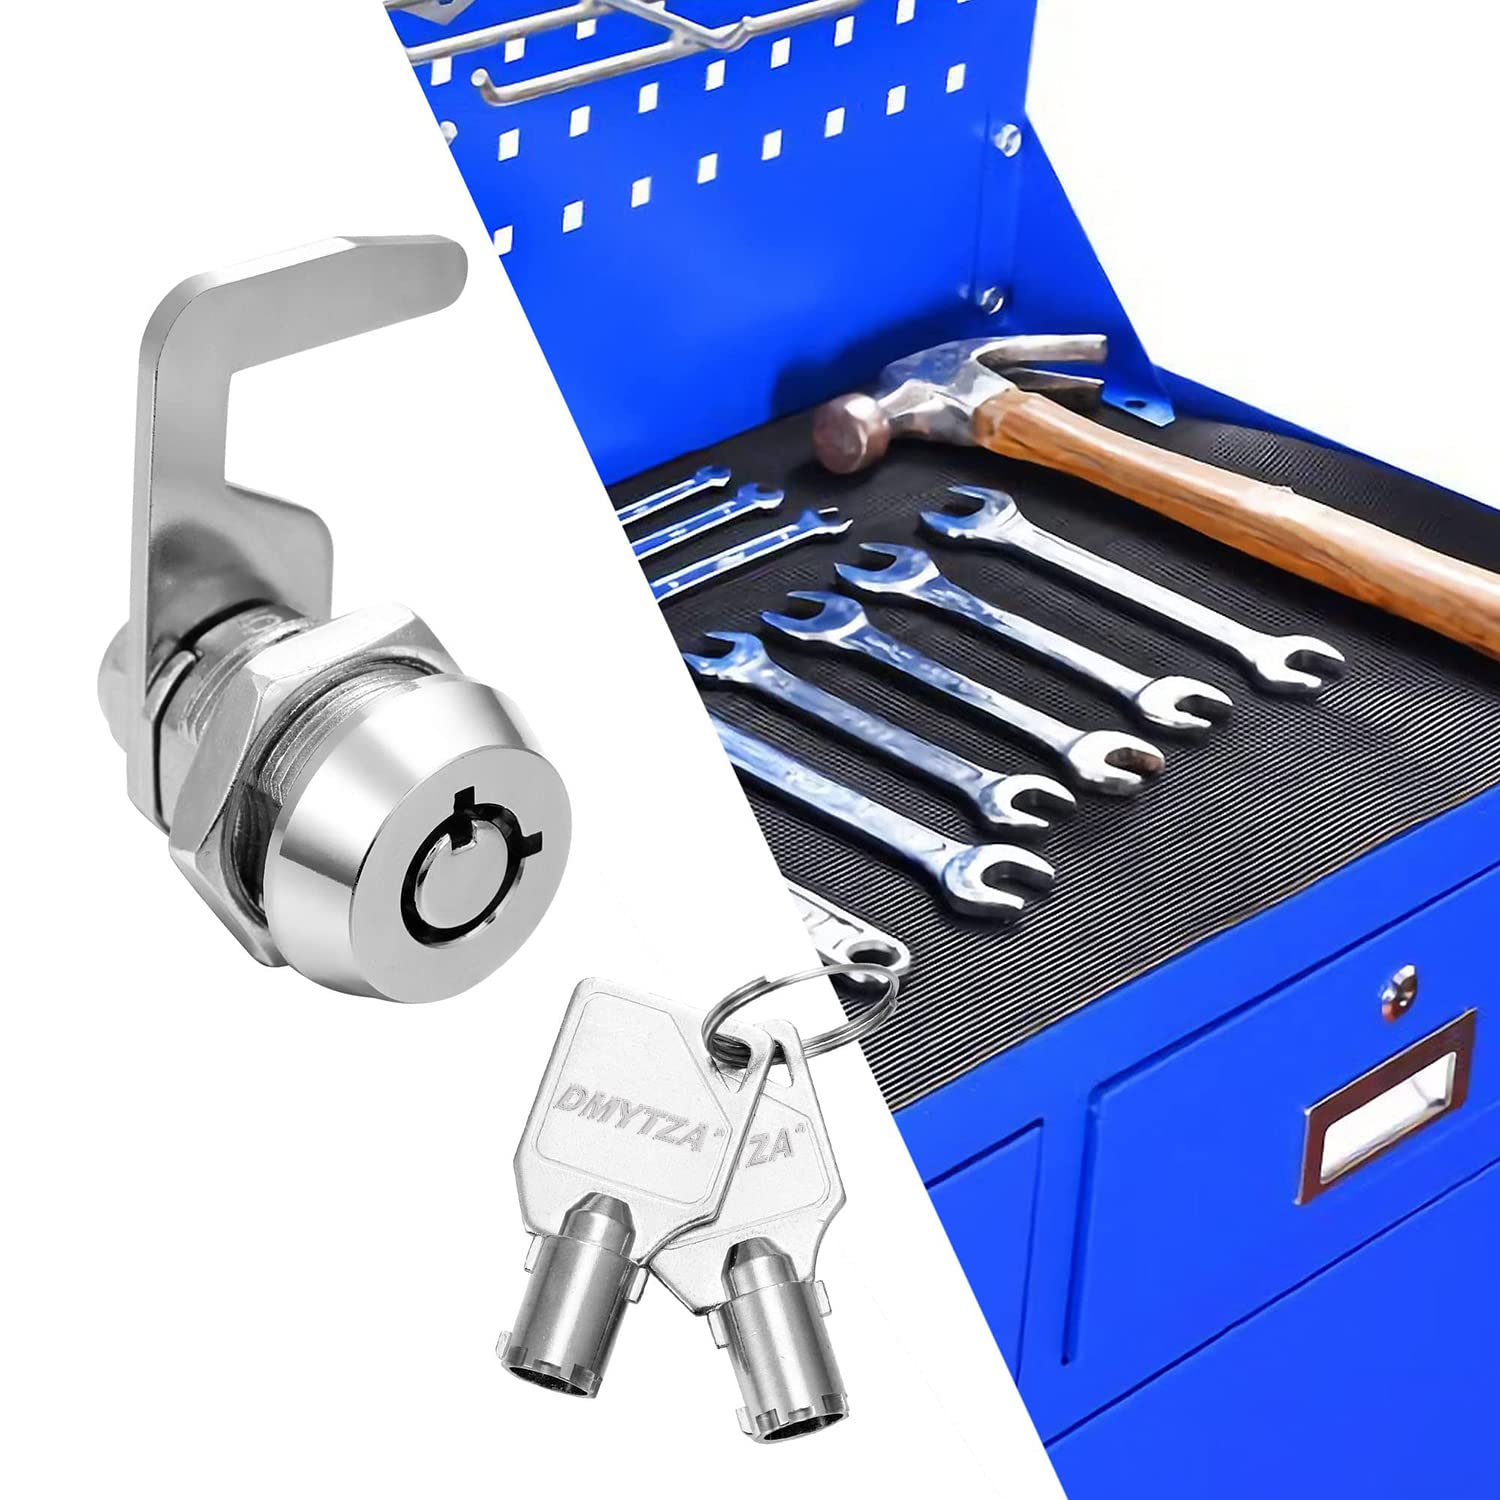 Cam Lock 5/8" Toolbox Lock 90 Degree, Tubular Lock with 2 Keyes, Cylinder Lock for File Cabinet and Mailbox use, Zinc Alloy